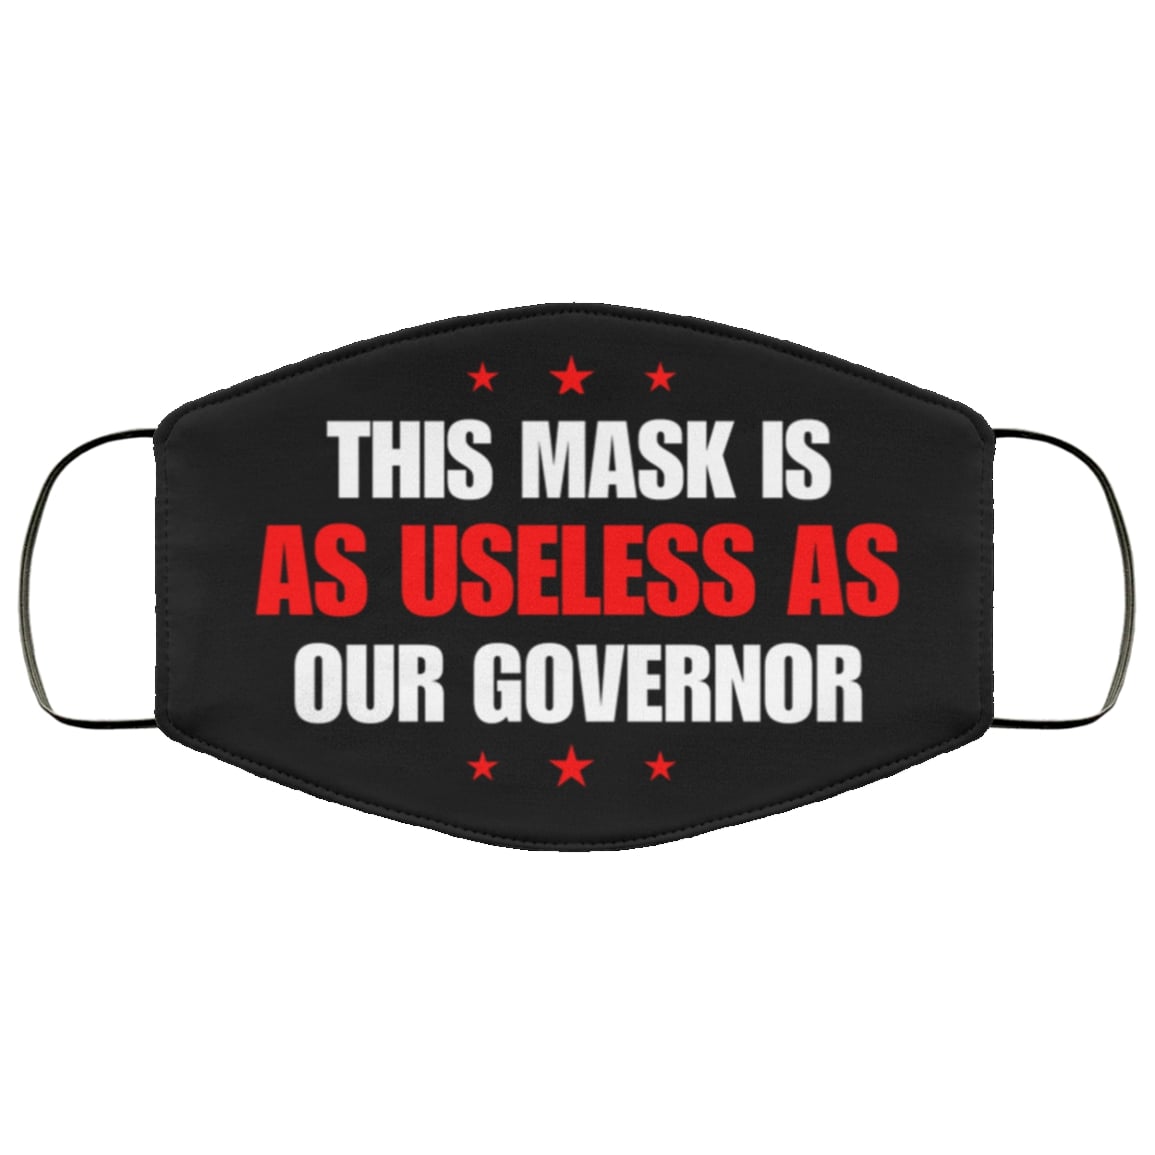 This mask is as useless as our governor full over printed face mask 1